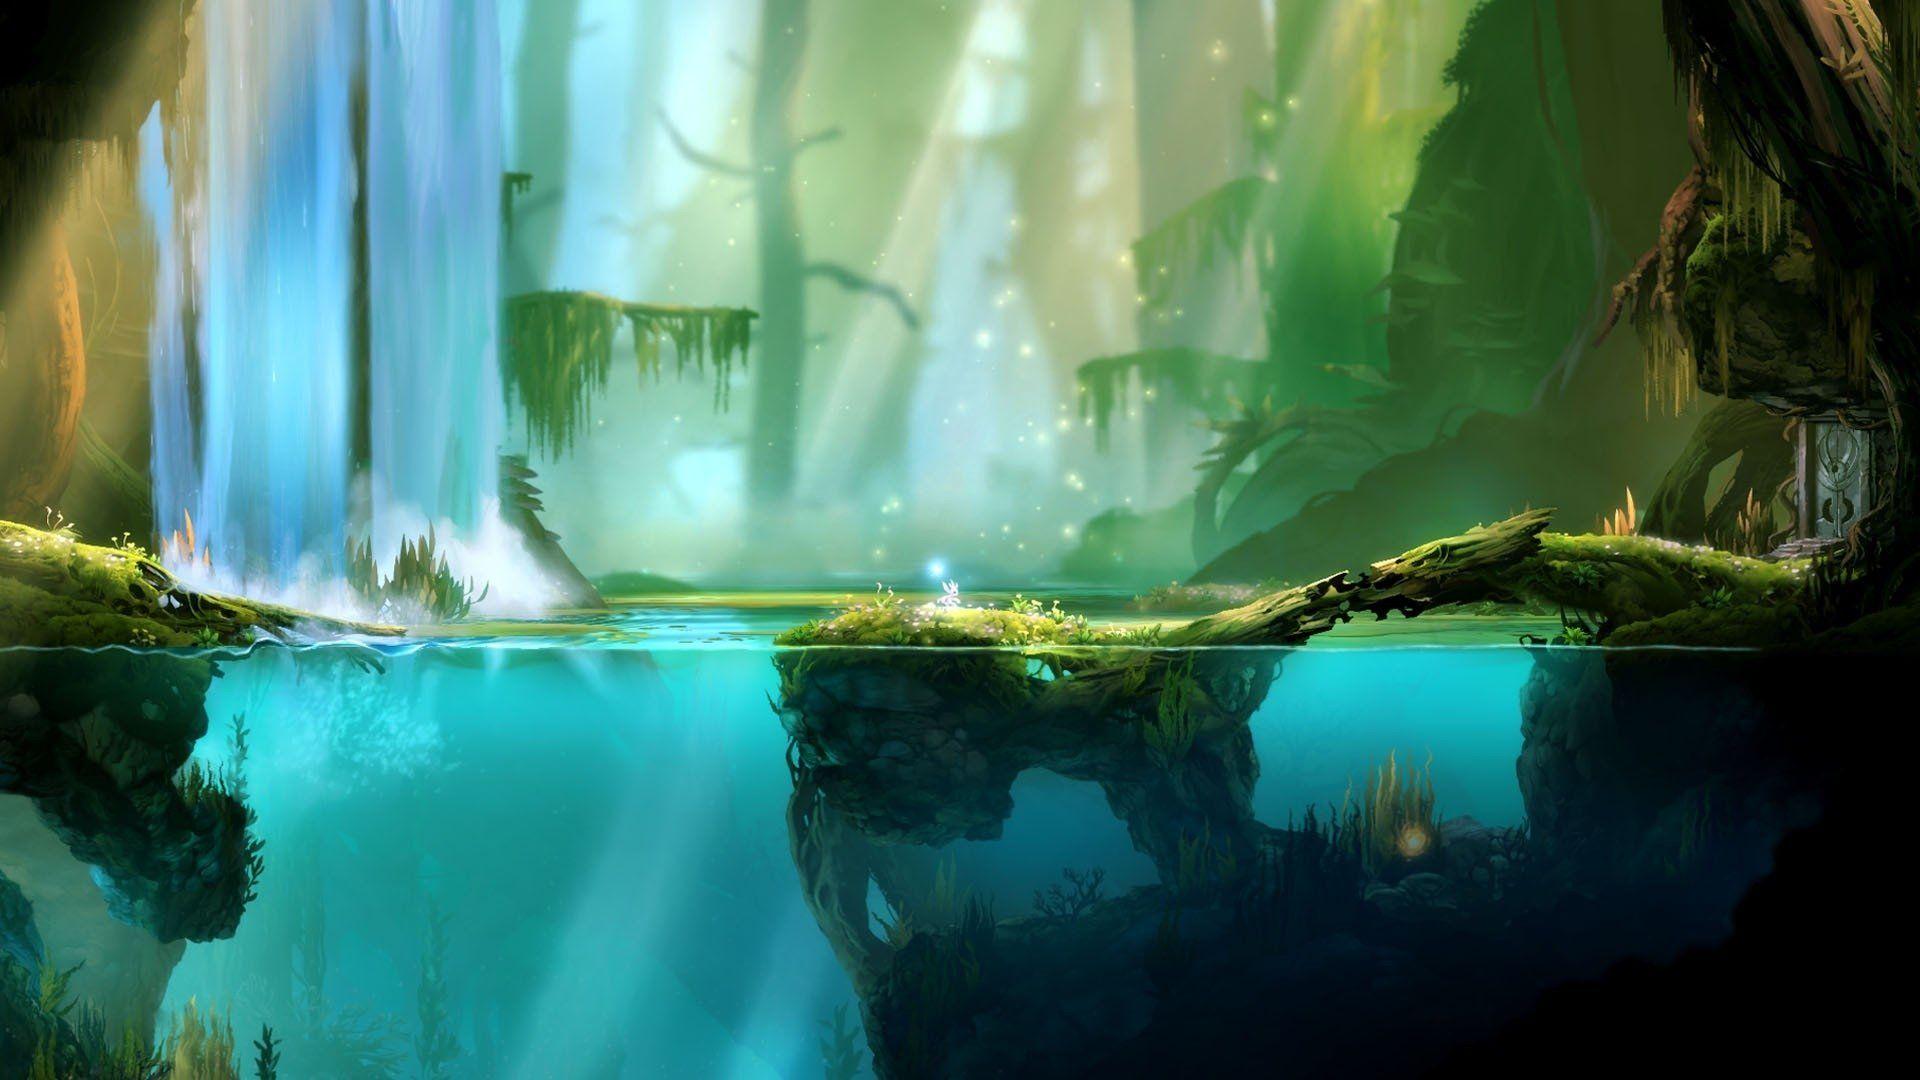 Ori and the Blind Forest HD Wallpaper